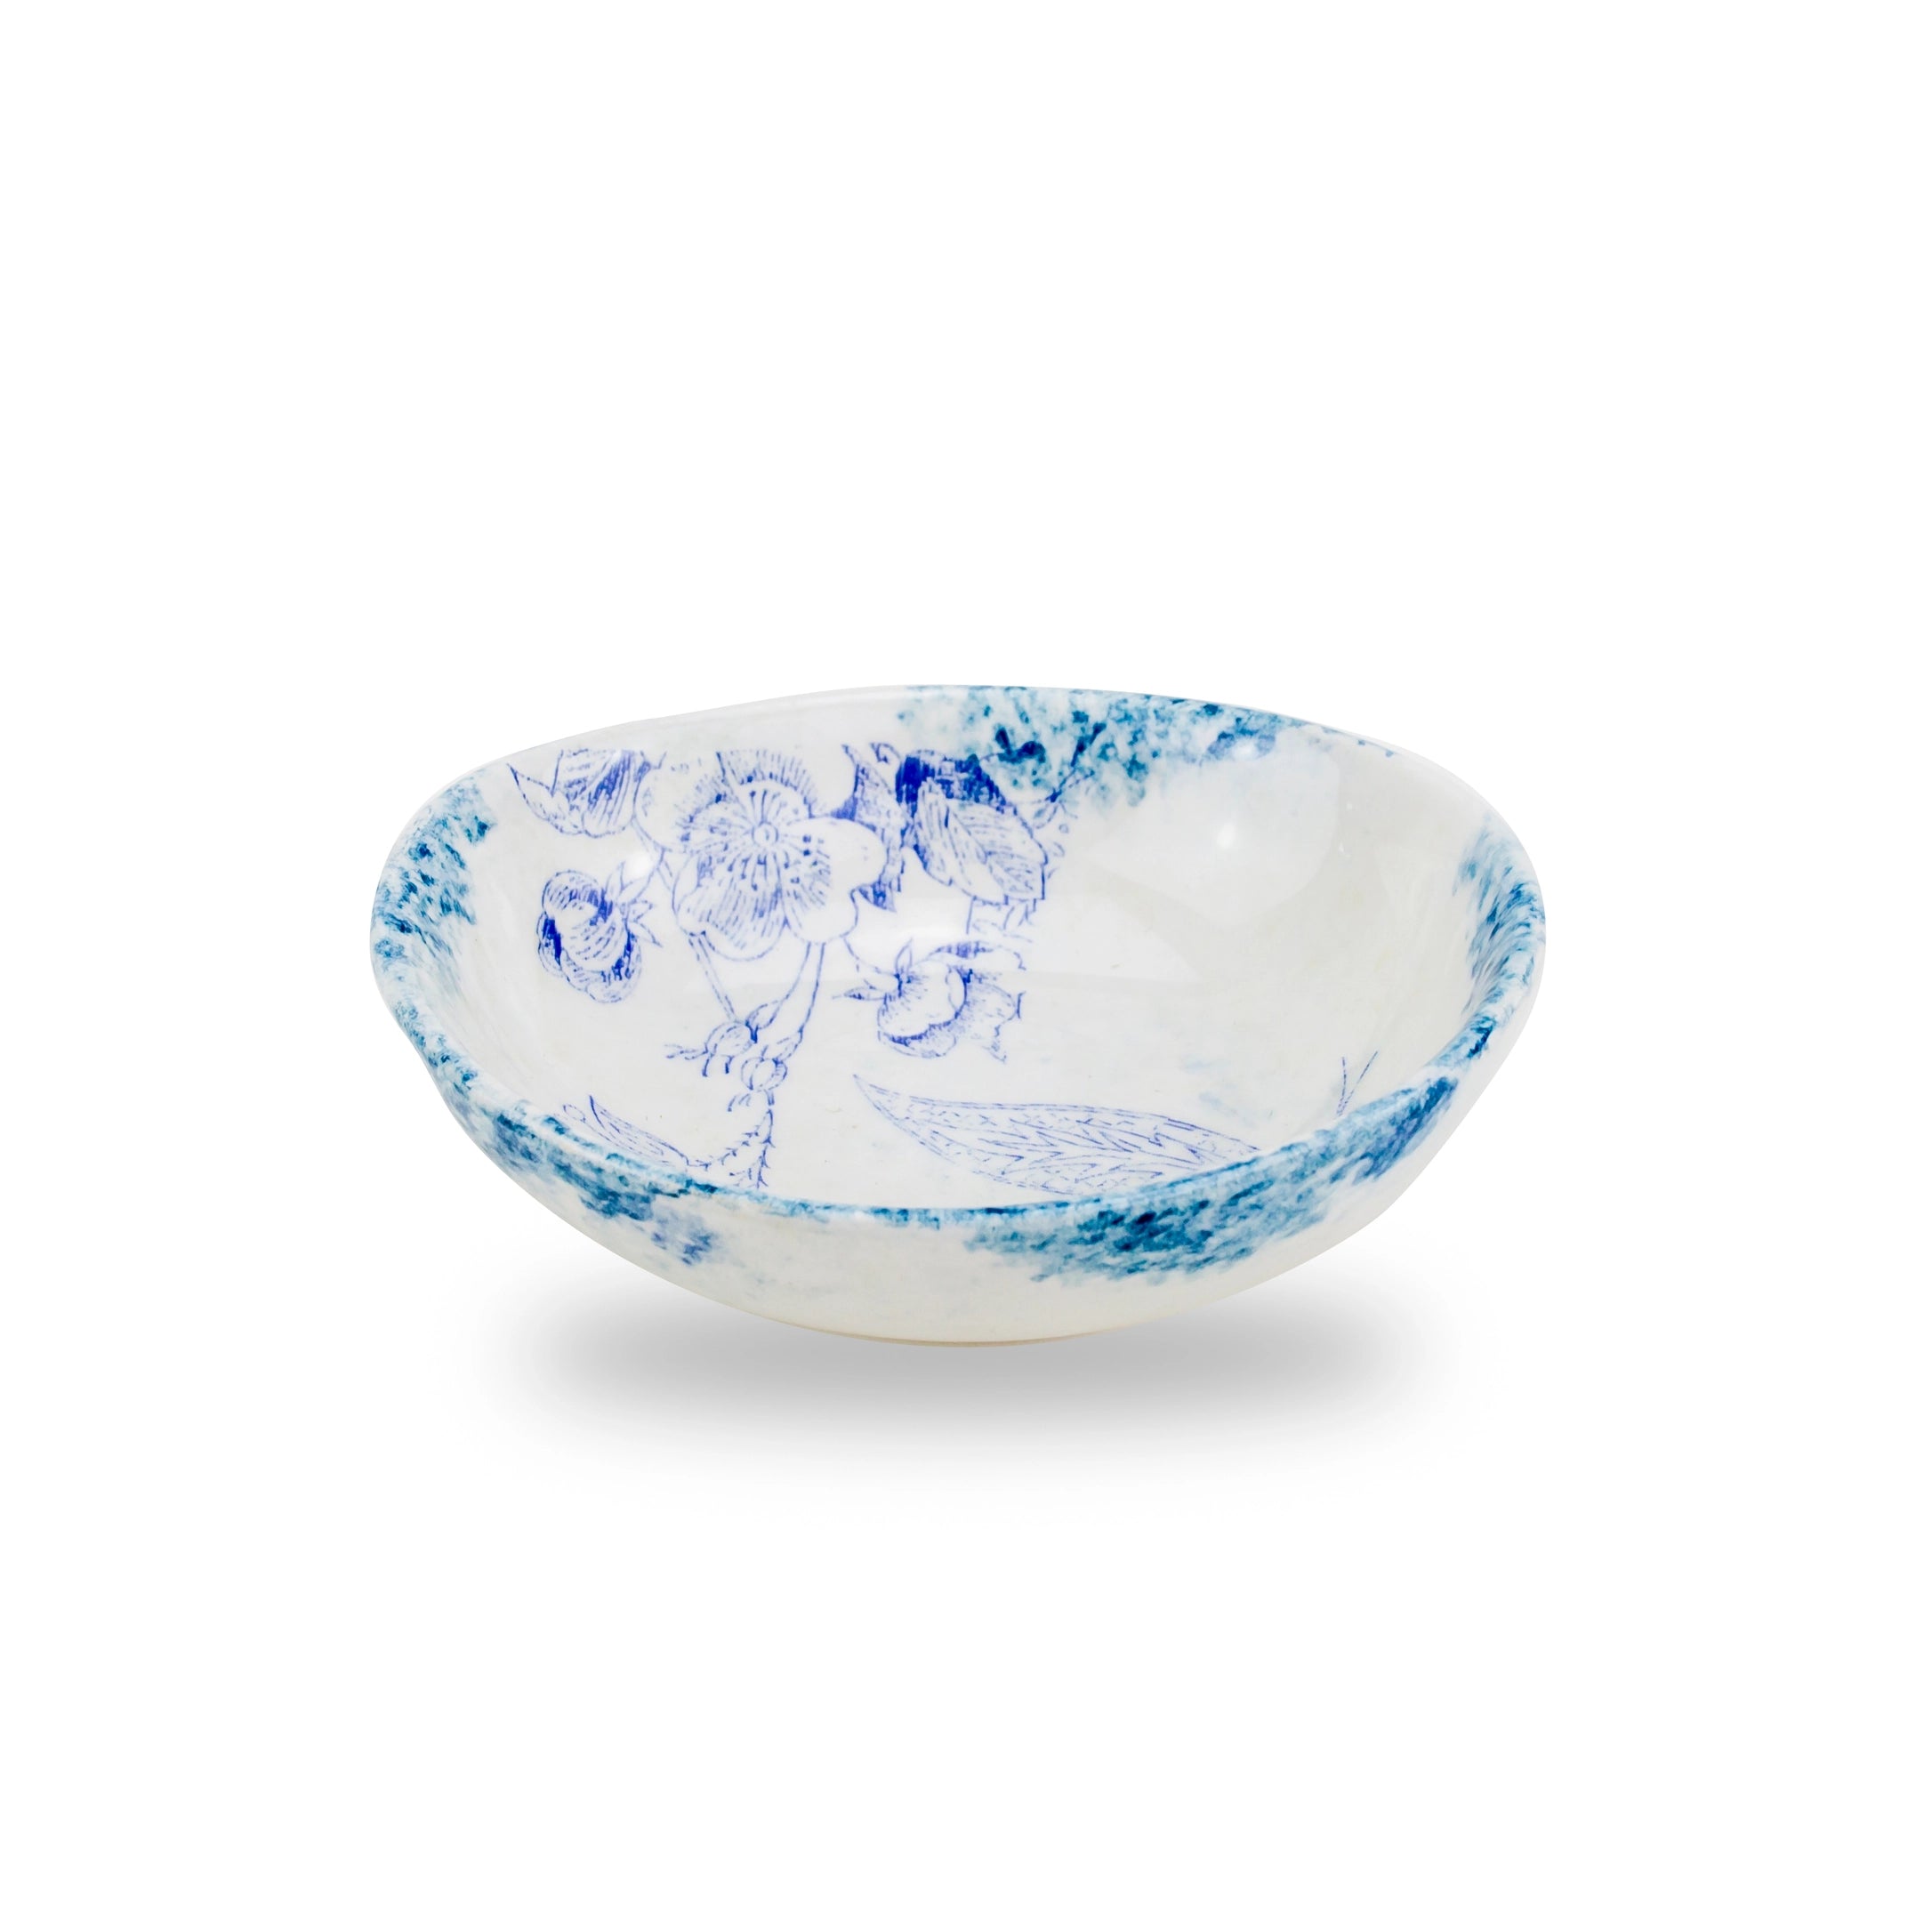 Giulietta Blue Oval Dipping Bowl - Set of 2